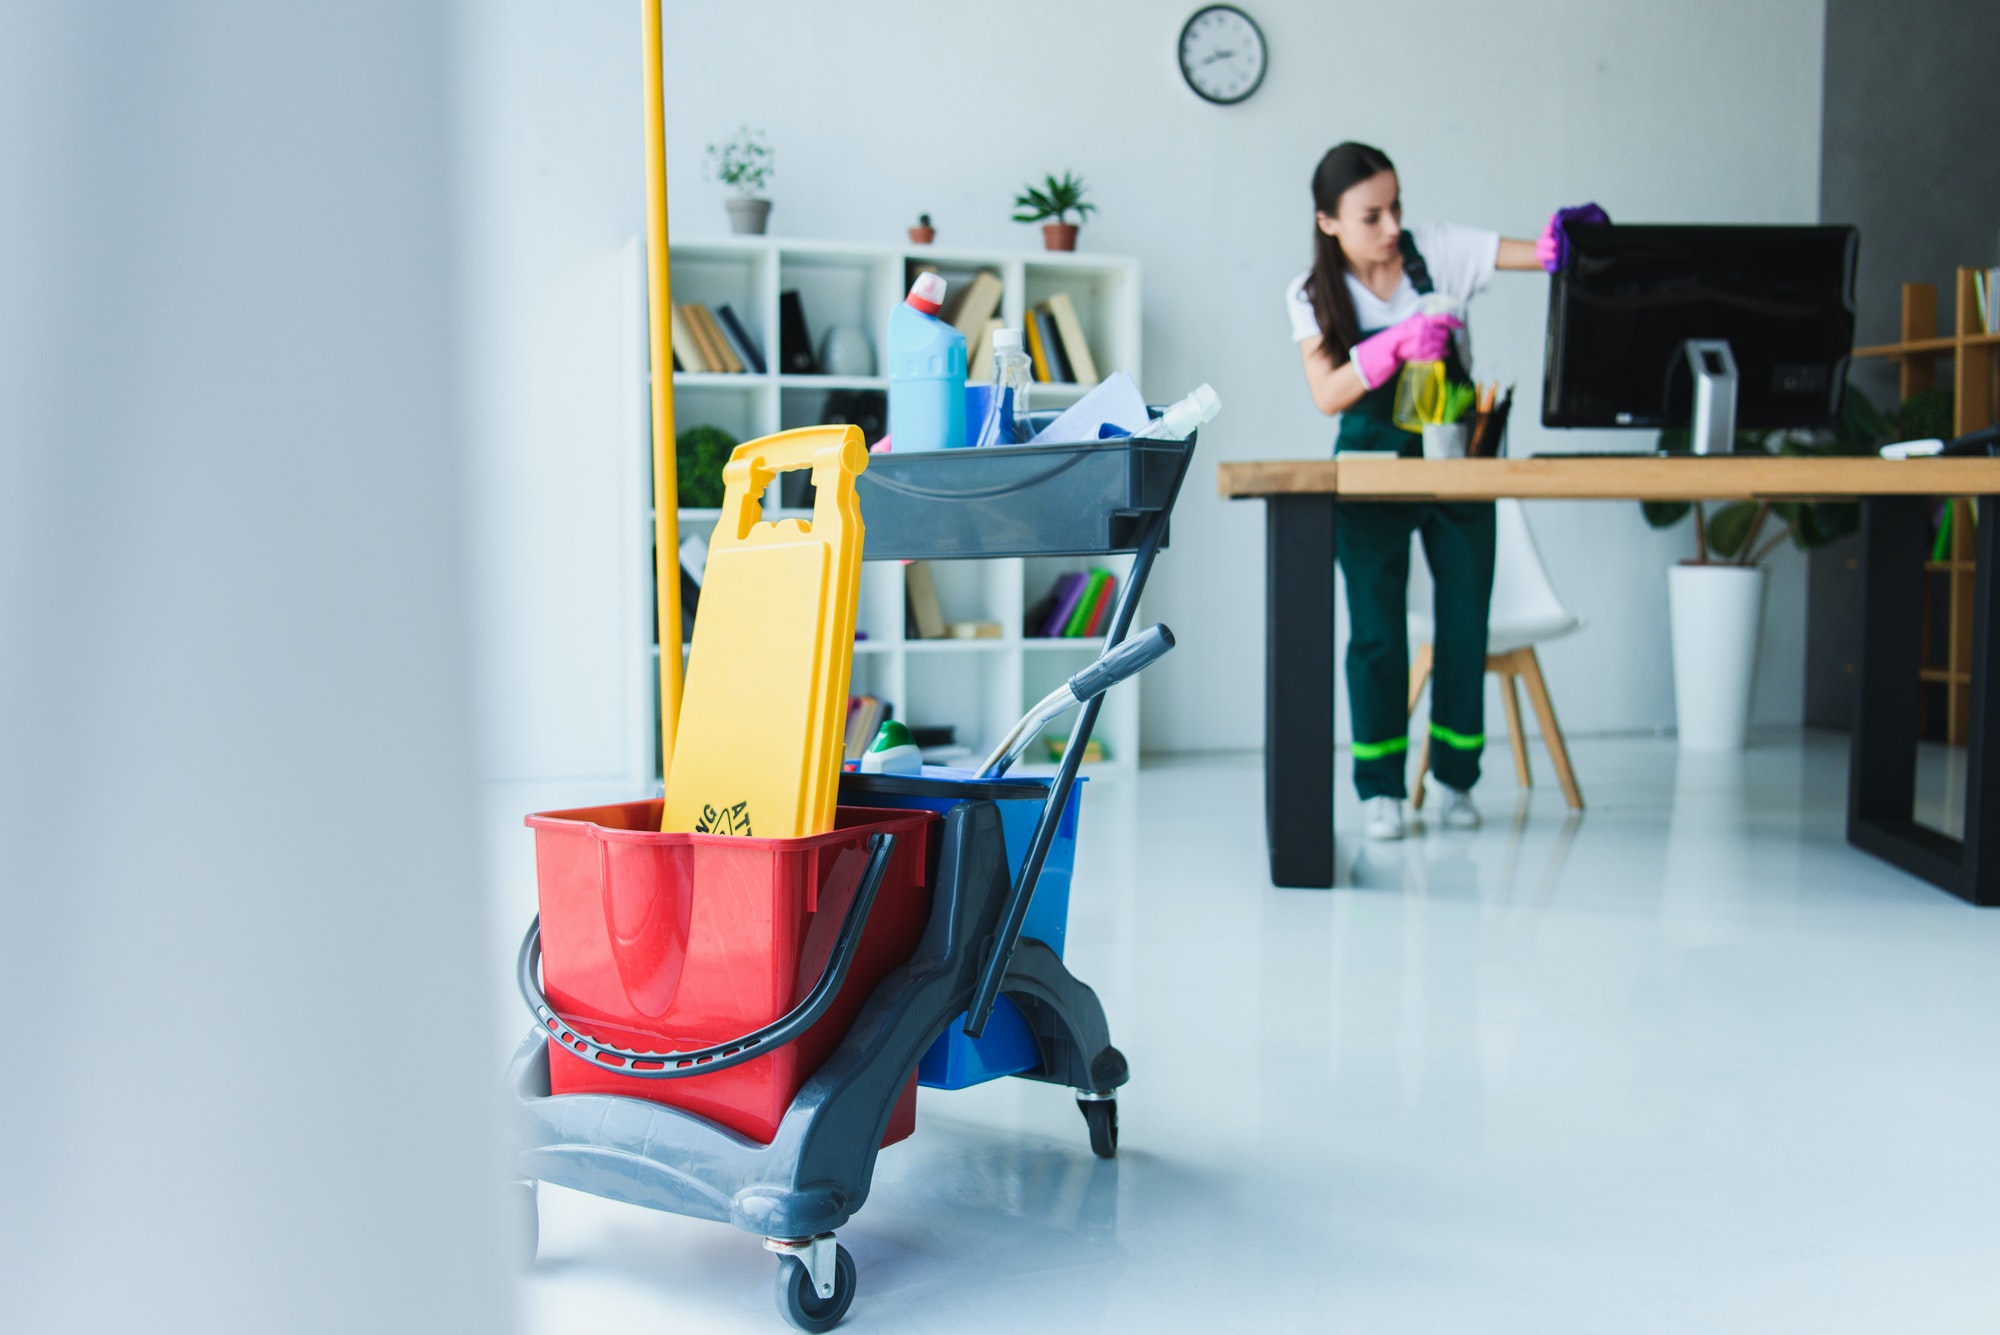 How to Hire an Office Cleaning Company: What to Look For